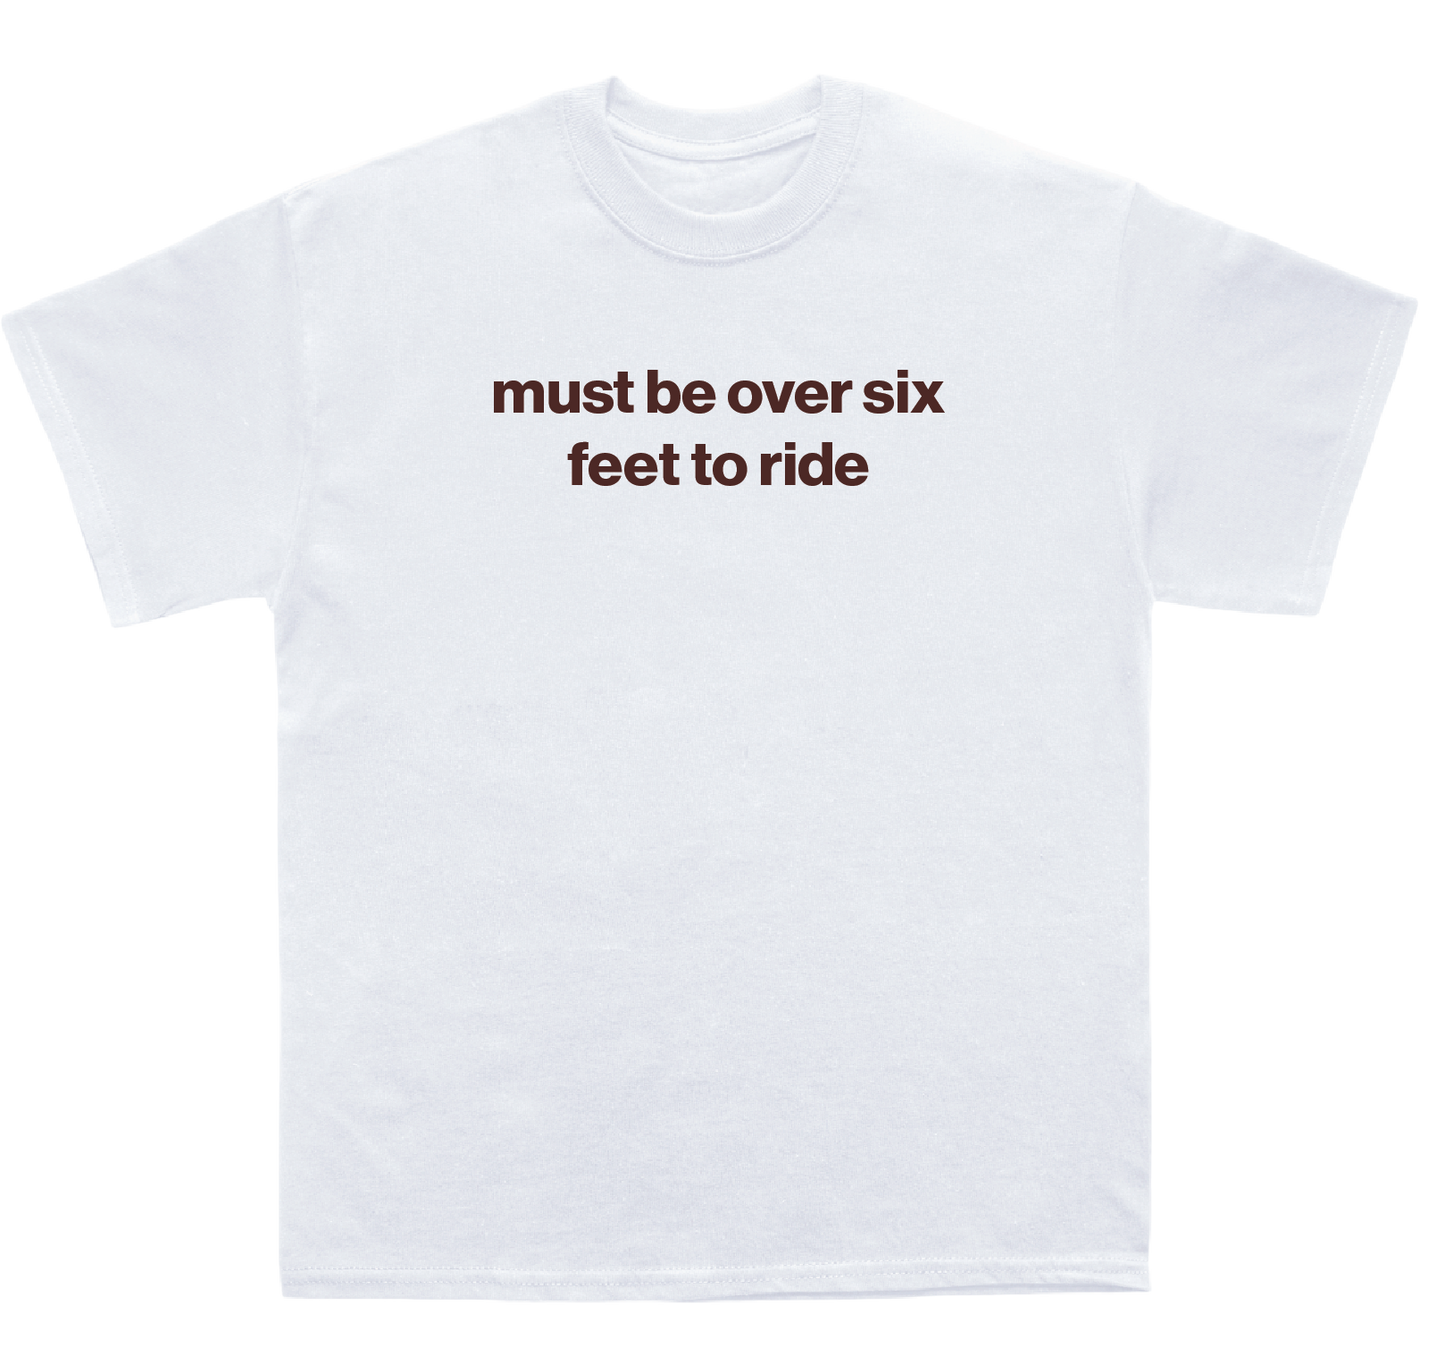 must be over six feet to ride shirt